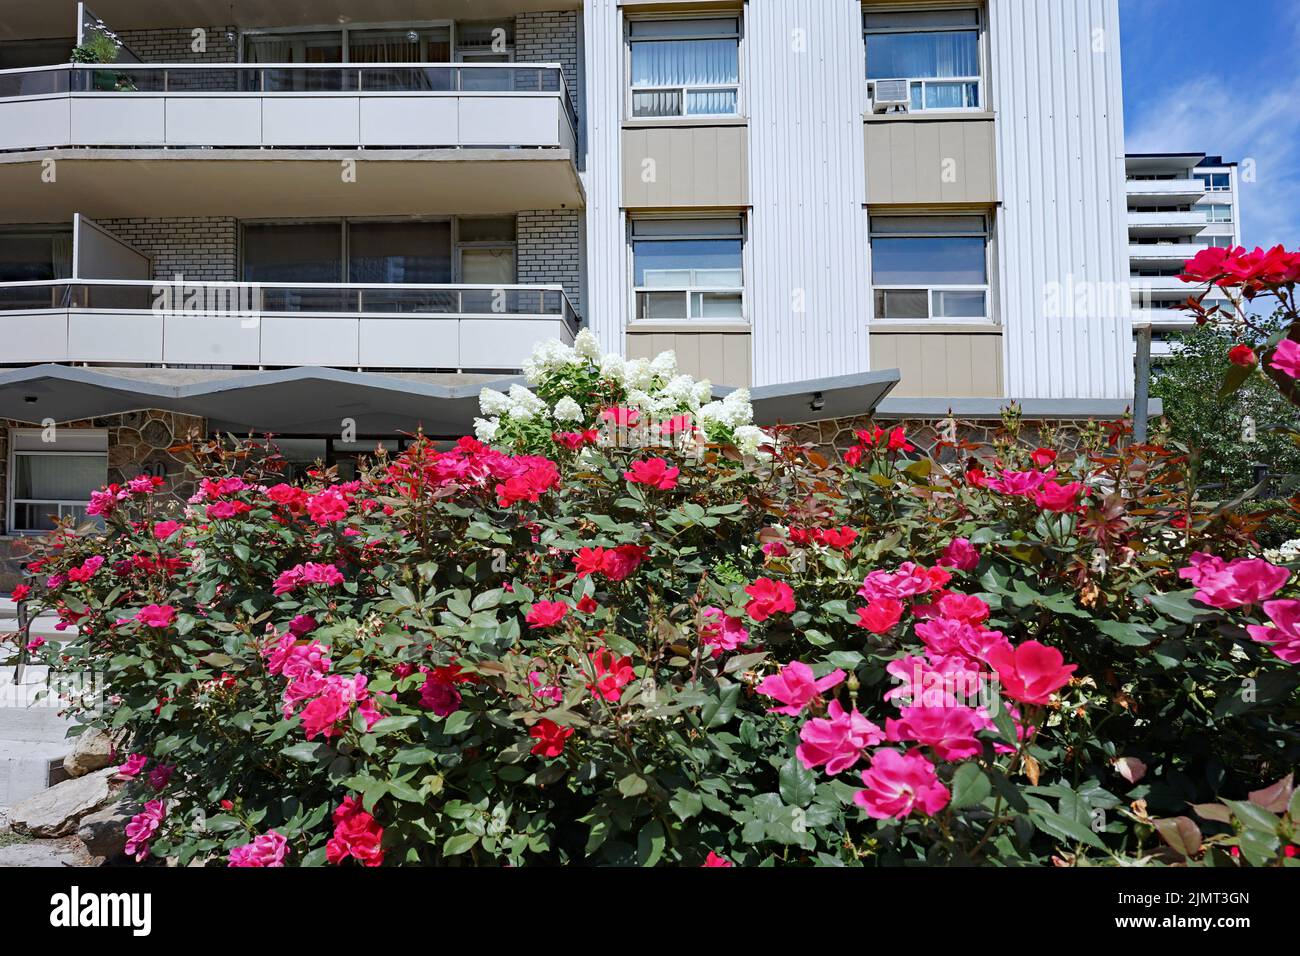 Front of apartment building decorated with colorful flowers Stock Photo